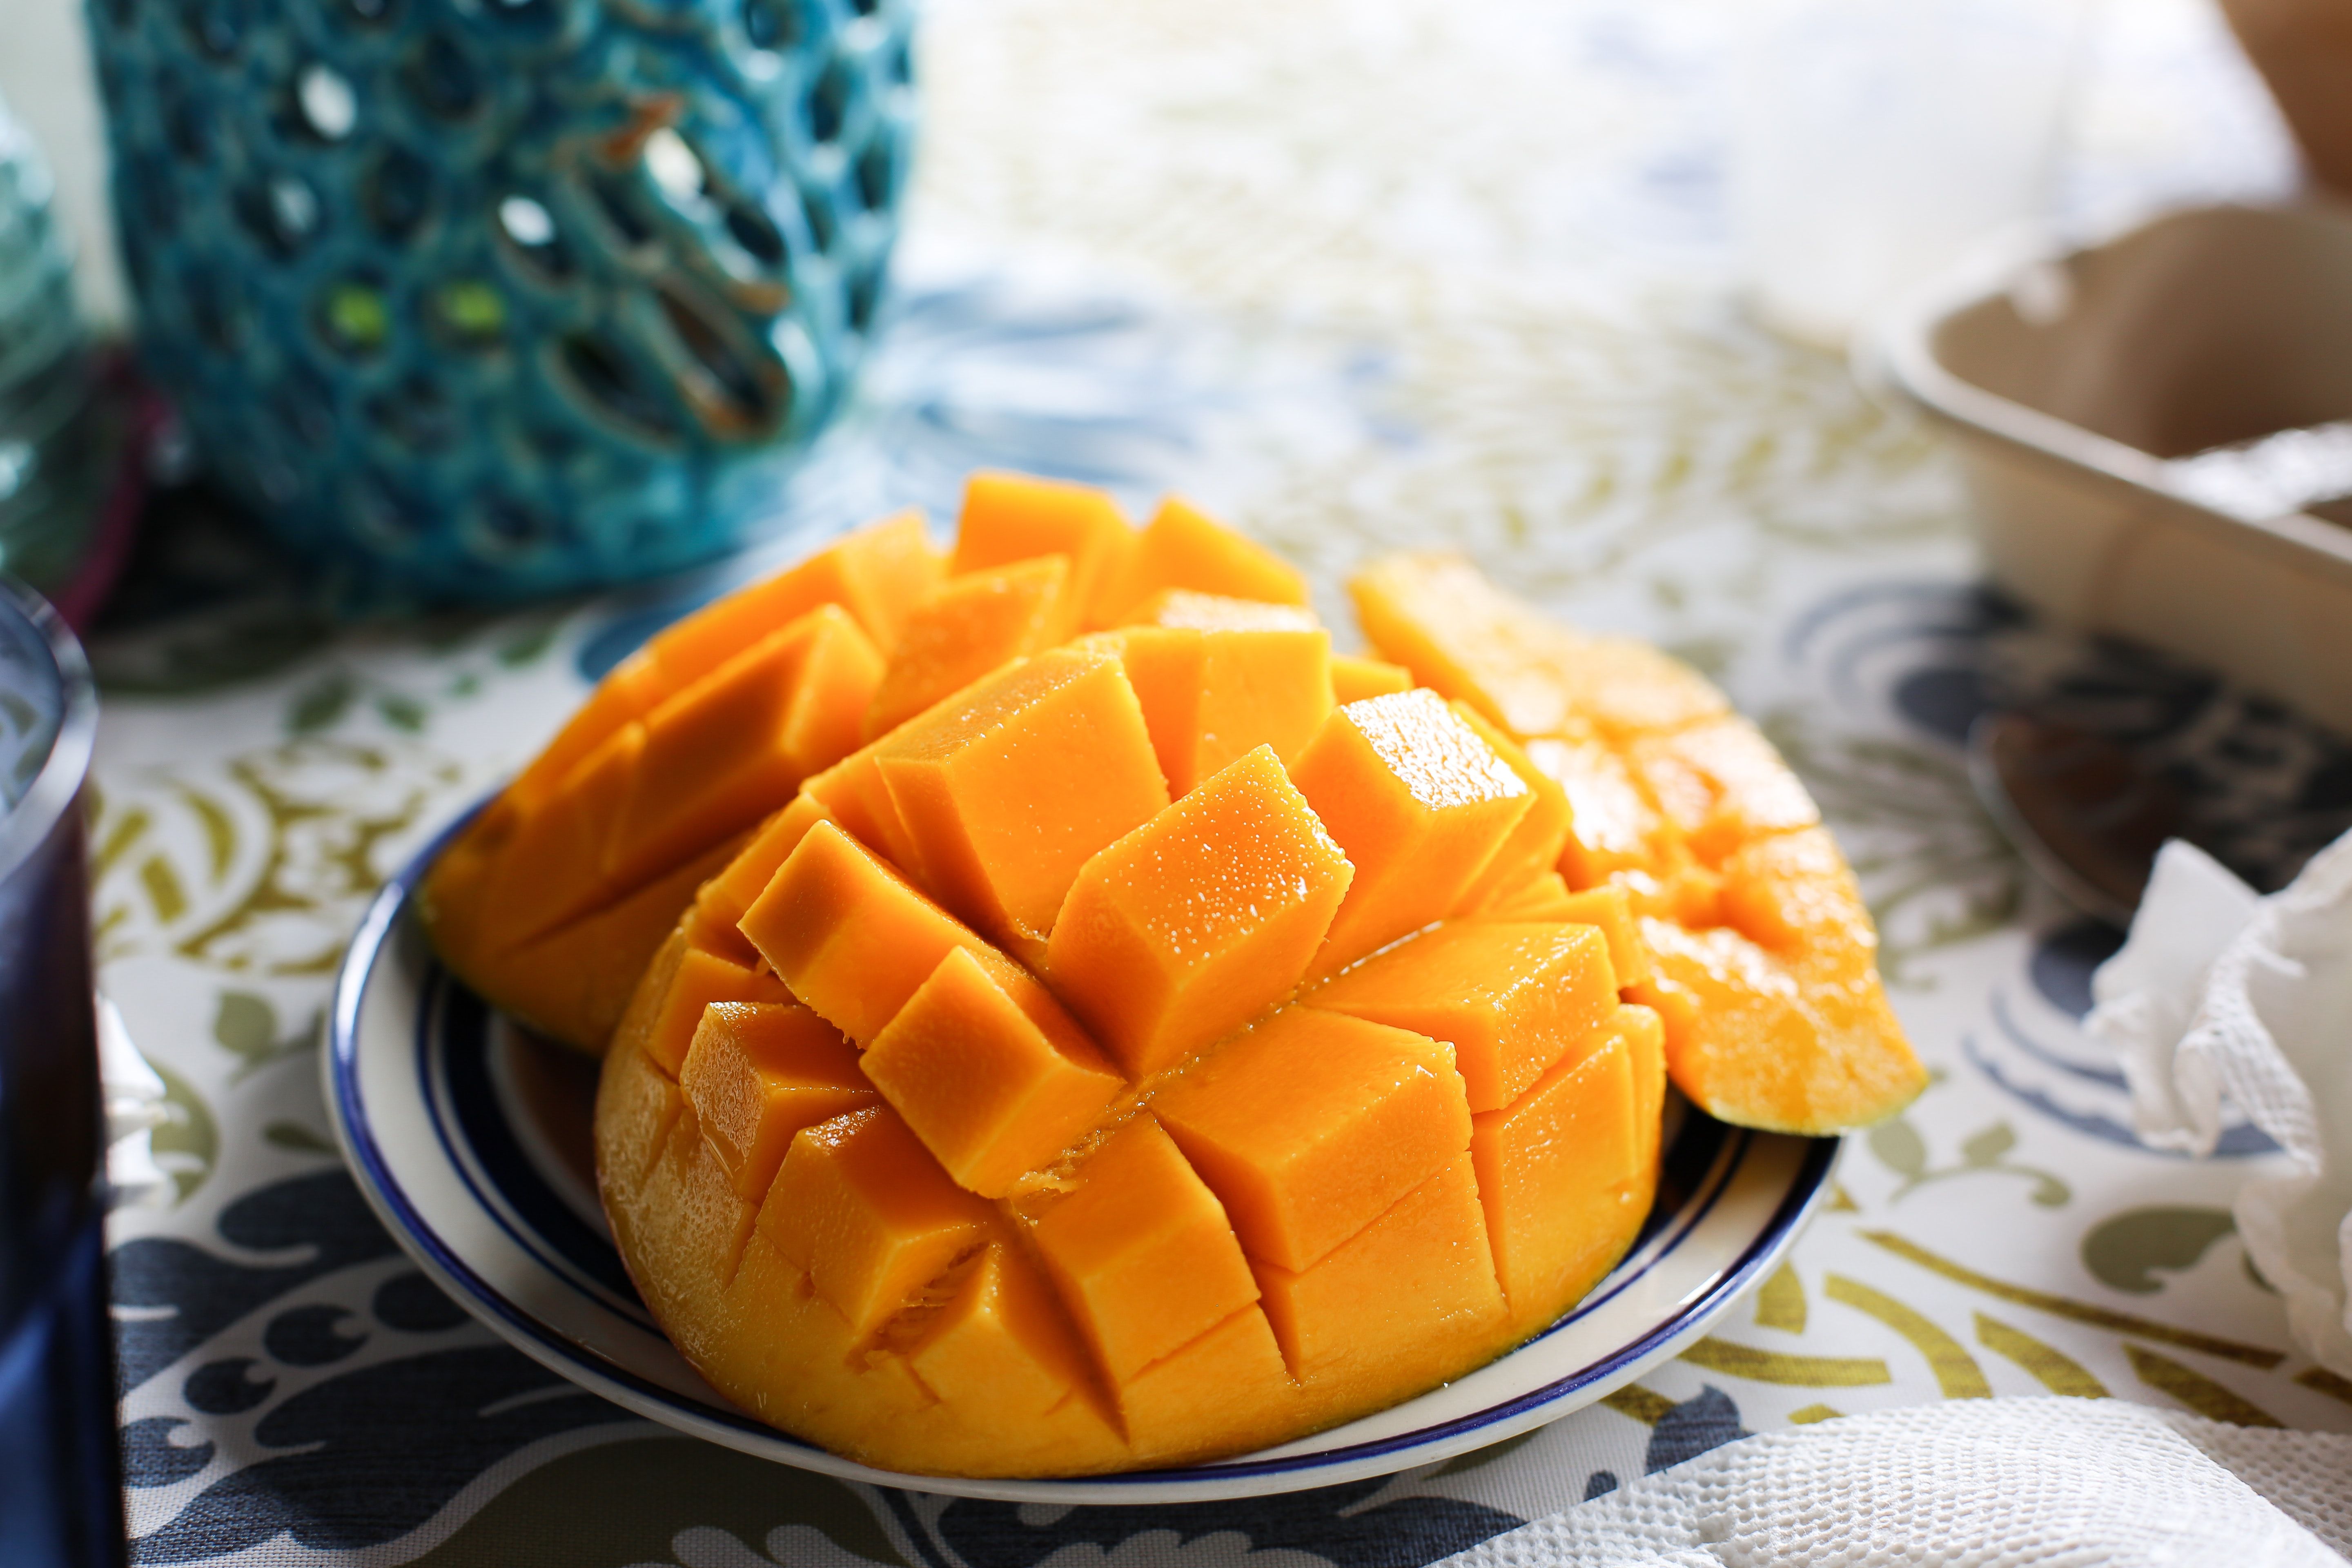 Can mangoes help you lose weight?